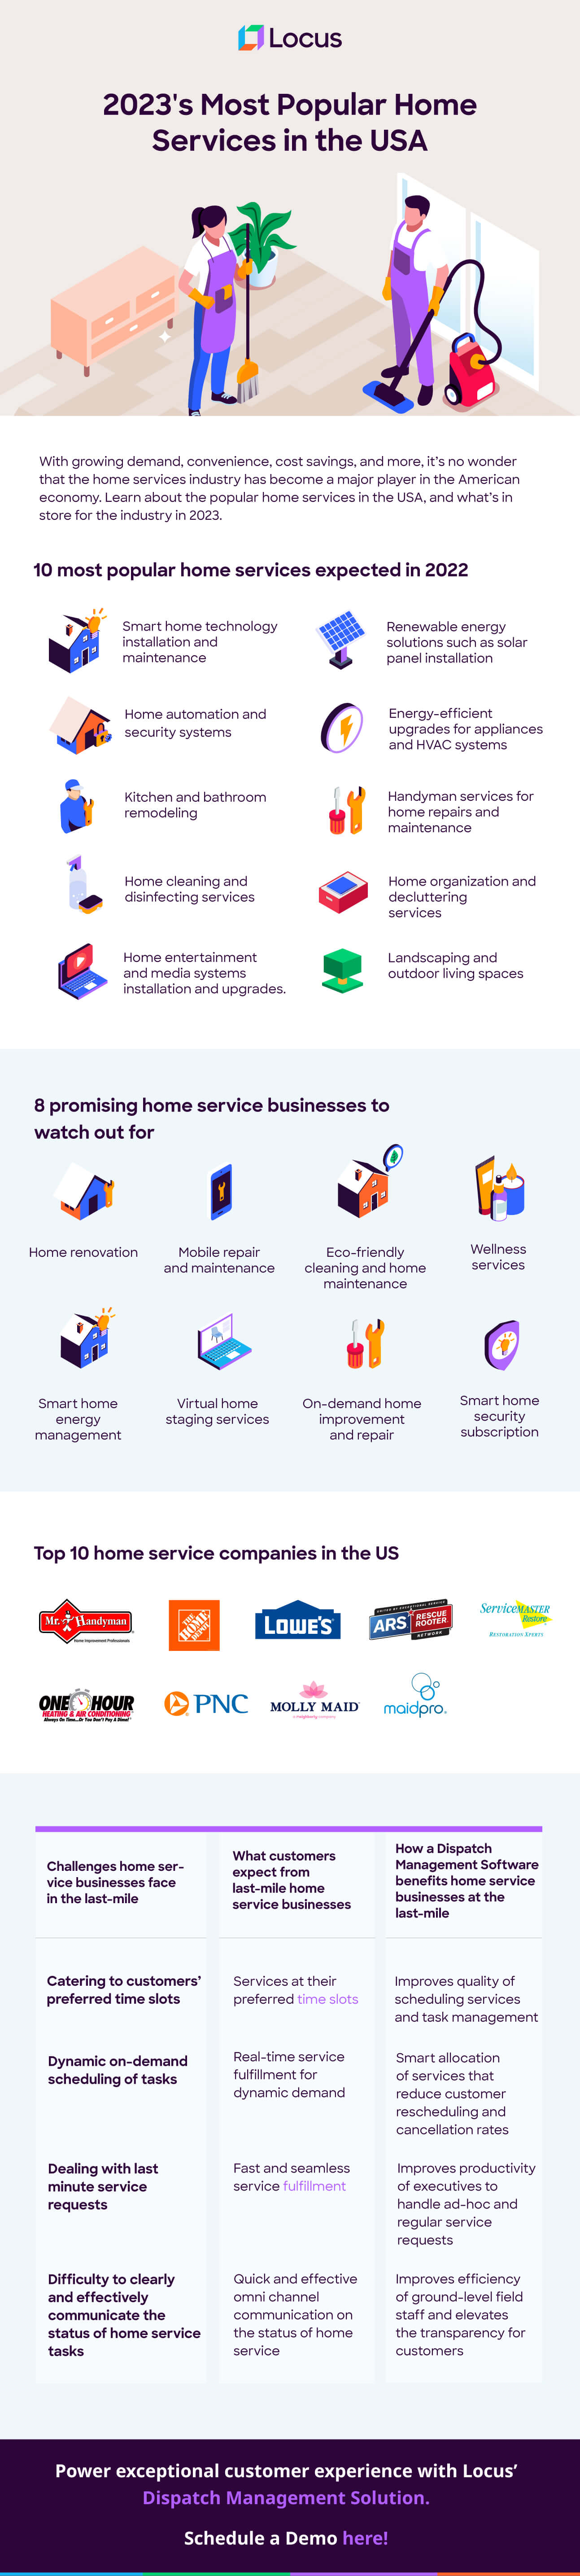 10 Popular and Upcoming Home Services in USA - 2022 | Locus